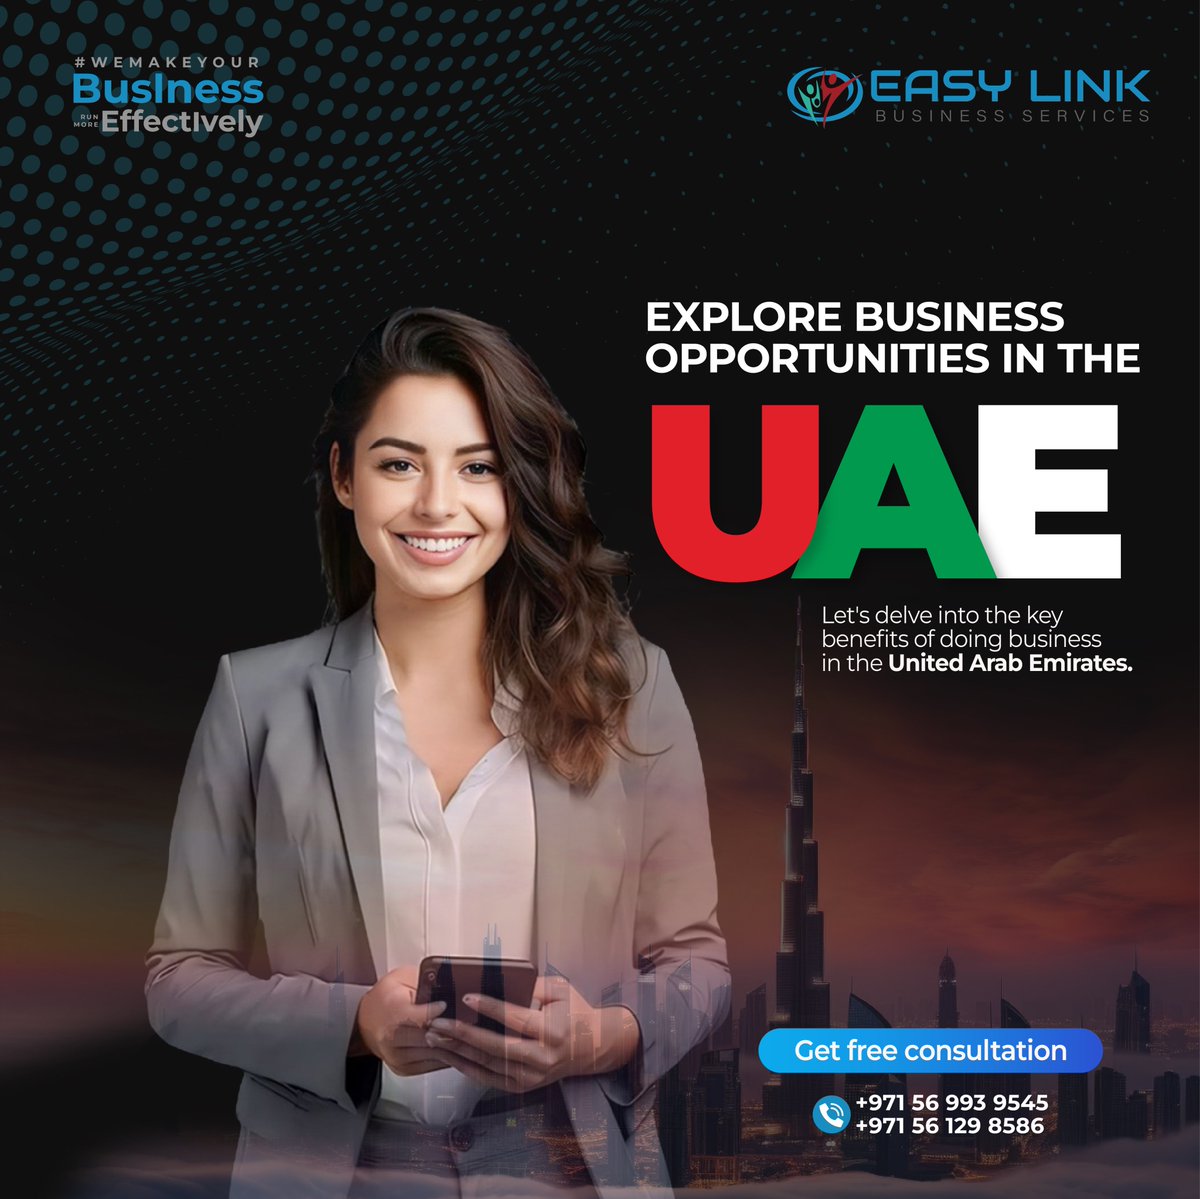 Dive into the world of business opportunities in the UAE with Easylin Travel and Tourism! 

+971 56 993 9545
info@easylinkdxb.com
easylinkdxb.com

#UAEBusiness #BusinessOpportunities #EasylinTravel #ExploreUAE #BusinessVentures #DubaiBusiness #AbuDhabiBusiness